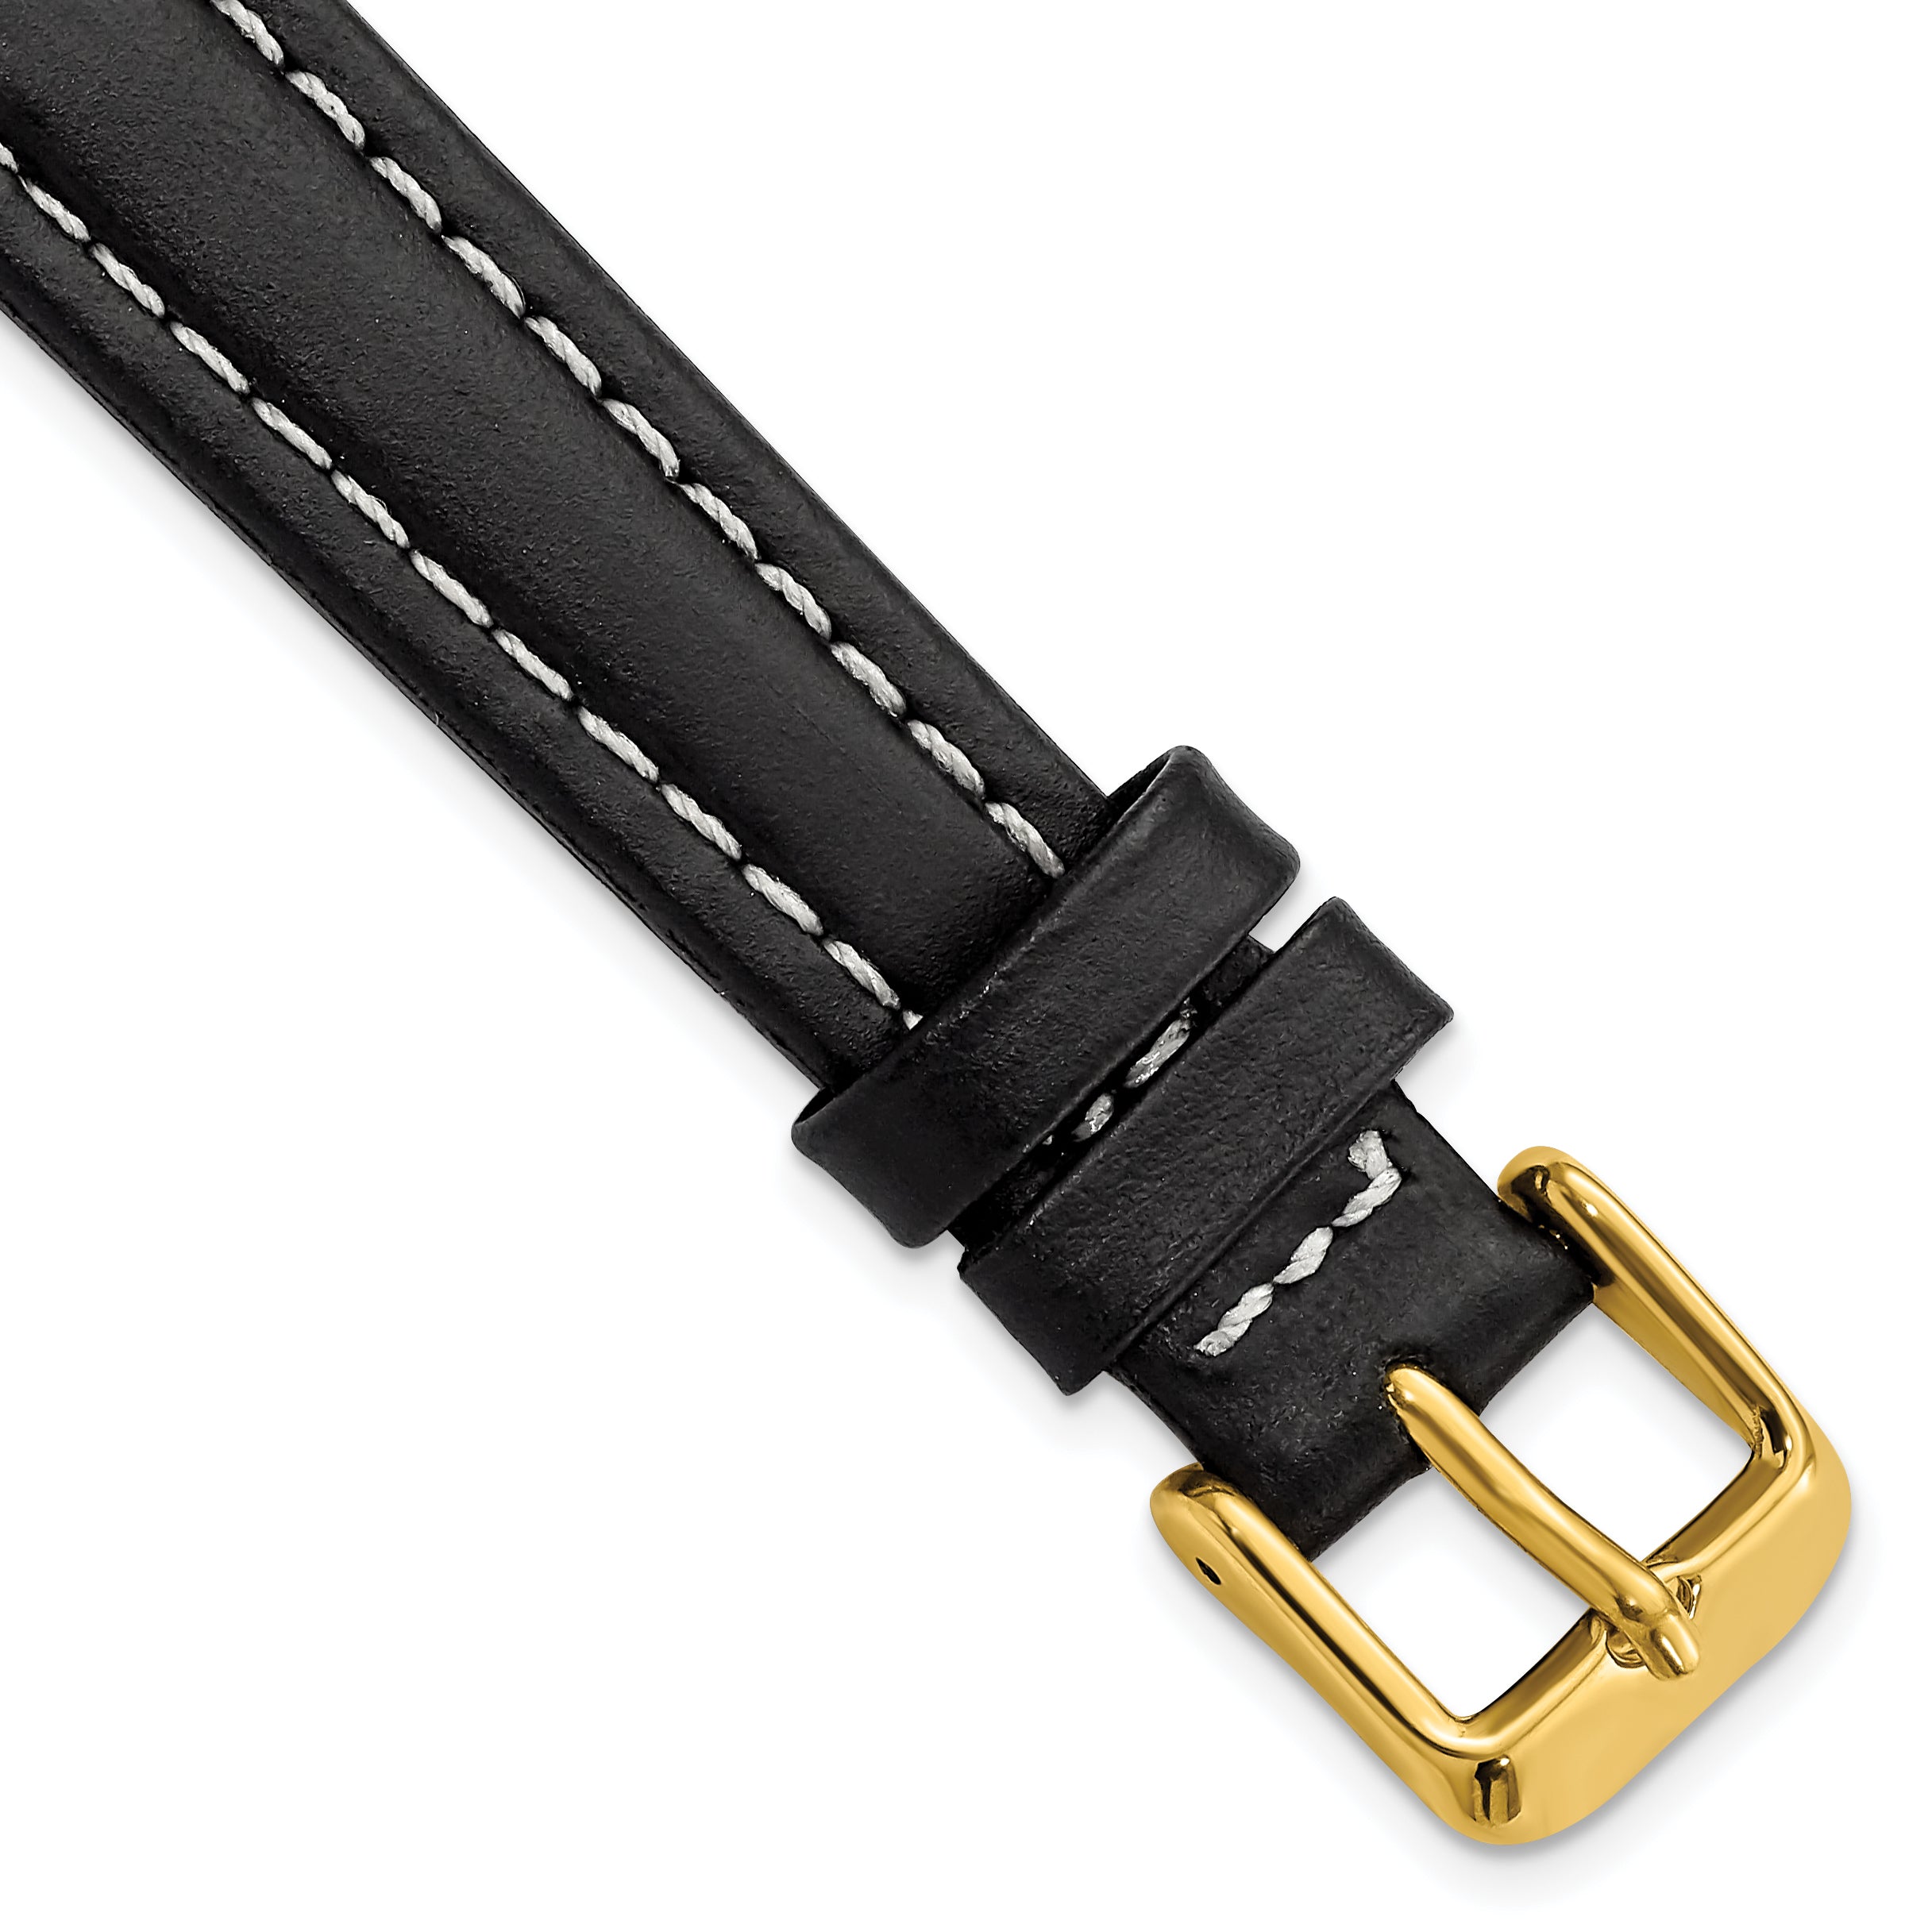 DeBeer 14mm Black Oil-tanned Leather with White Stitching and Gold-tone Buckle 6.75 inch Watch Band